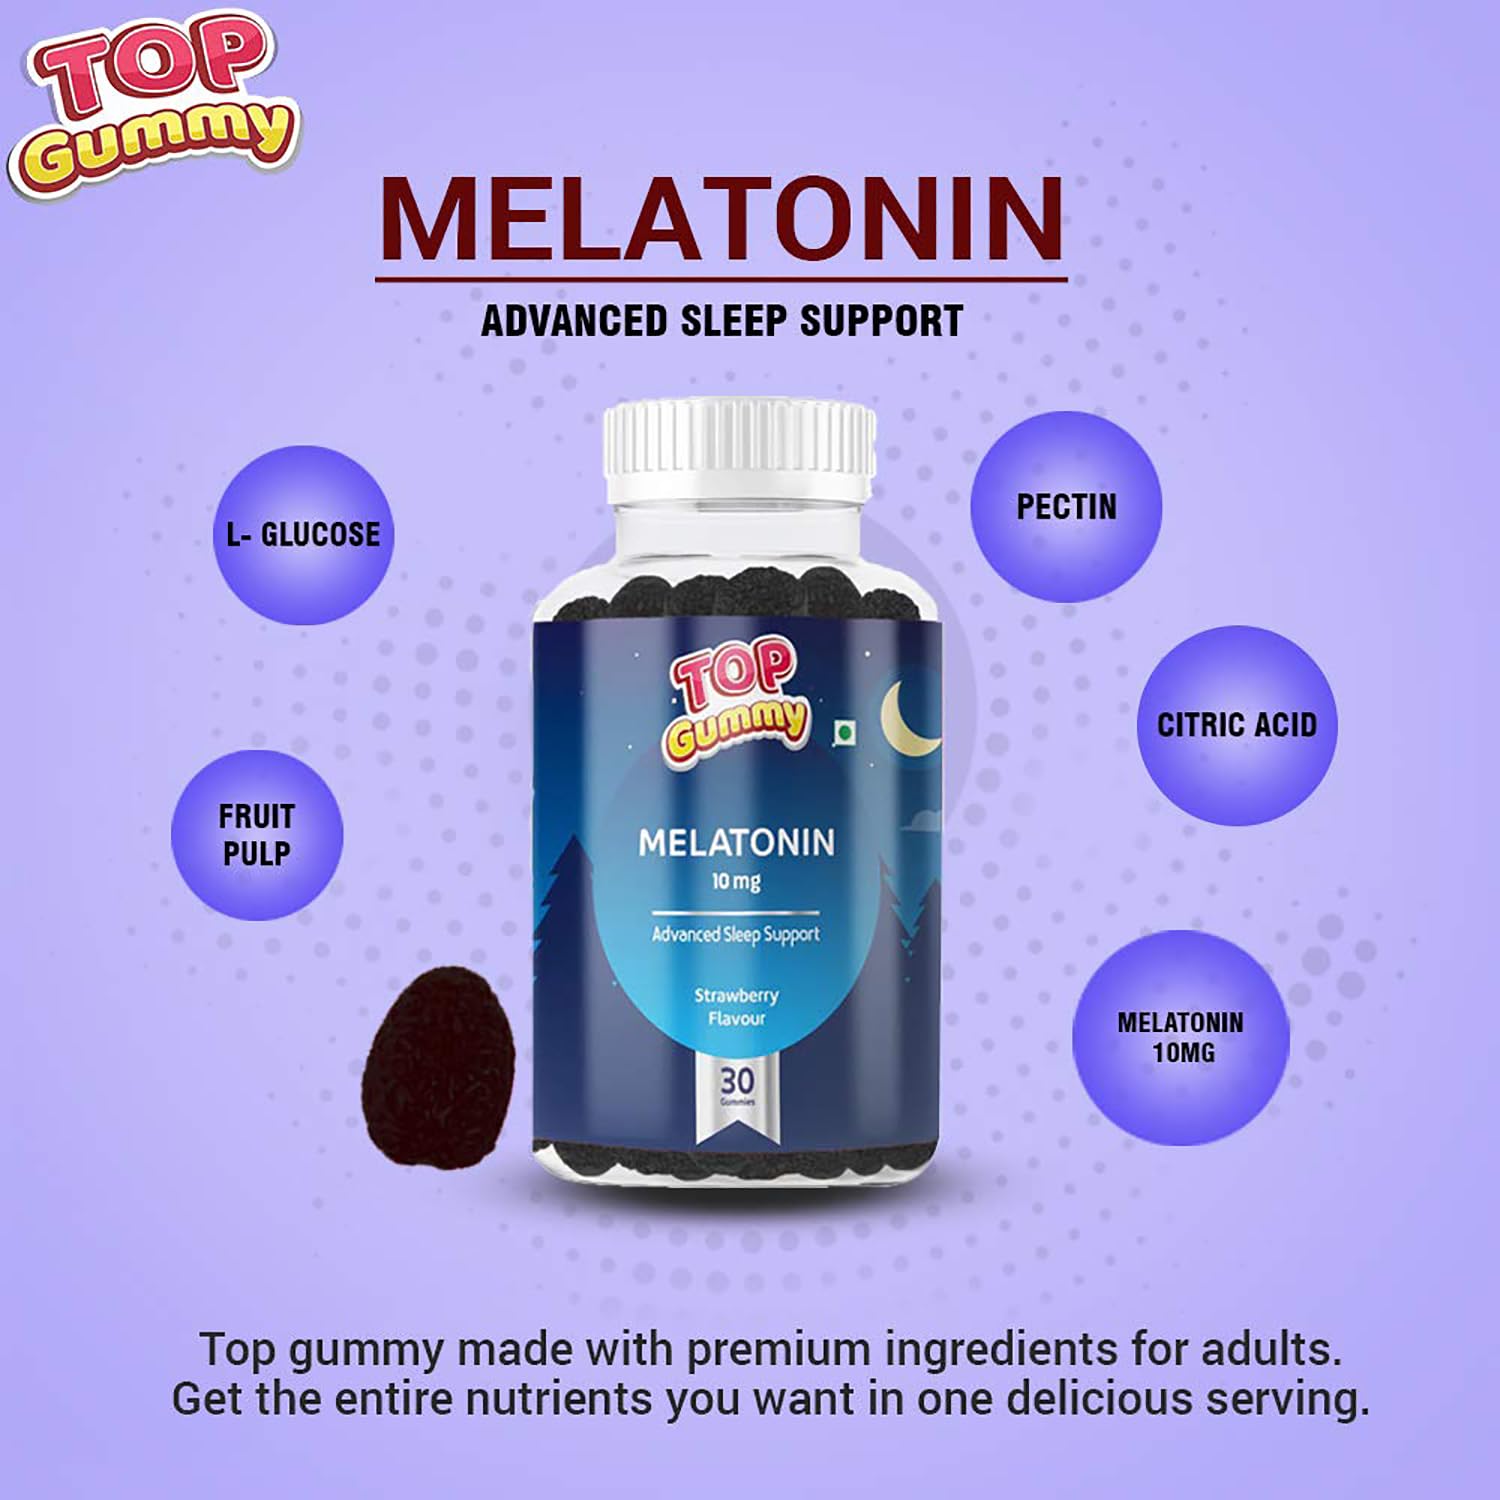 Top Gummy Melatonin 10mg | Advanced Sleep Support, Stay Asleep Longer, Easy to Take, Dissolves in Mouth, Faster Absorption | Gluten, Soy & Dairy Free – 30 Gummies (Strawberry Flavour) (Pack of 5)